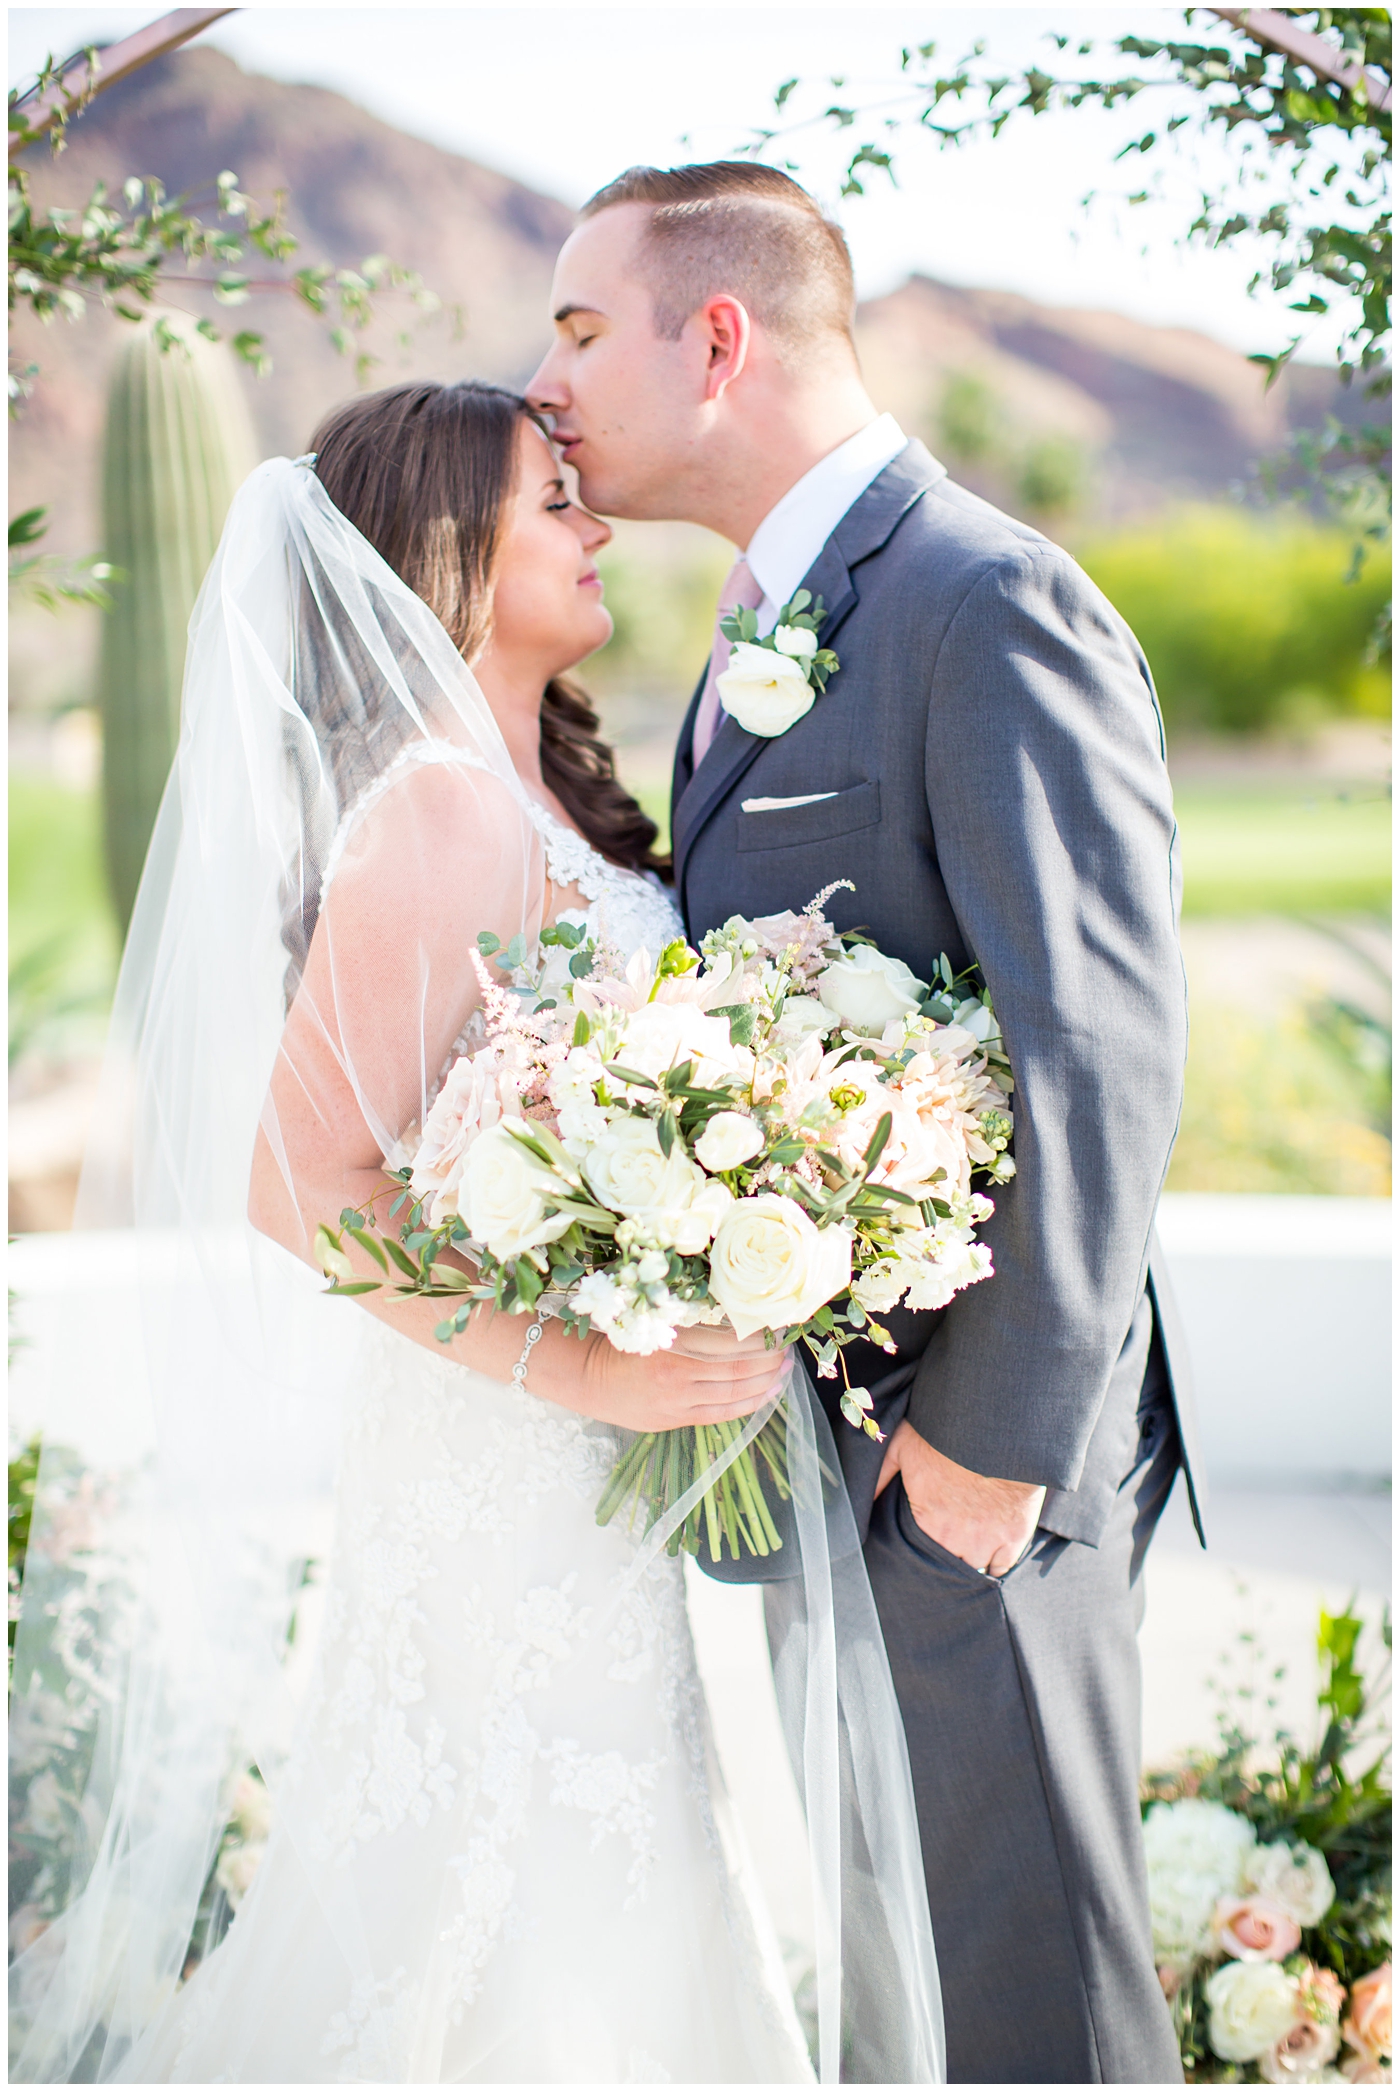 bride in wtoo watters wedding dress with lace straps with wildflower bridal bouquet with soft pink, blush, white, greenery flowers including roses, dahlias, snapdragons with groom in gray suit with pink tie and ranunculus boutonniere with unique circle arch detail for ceremony wedding day portrait